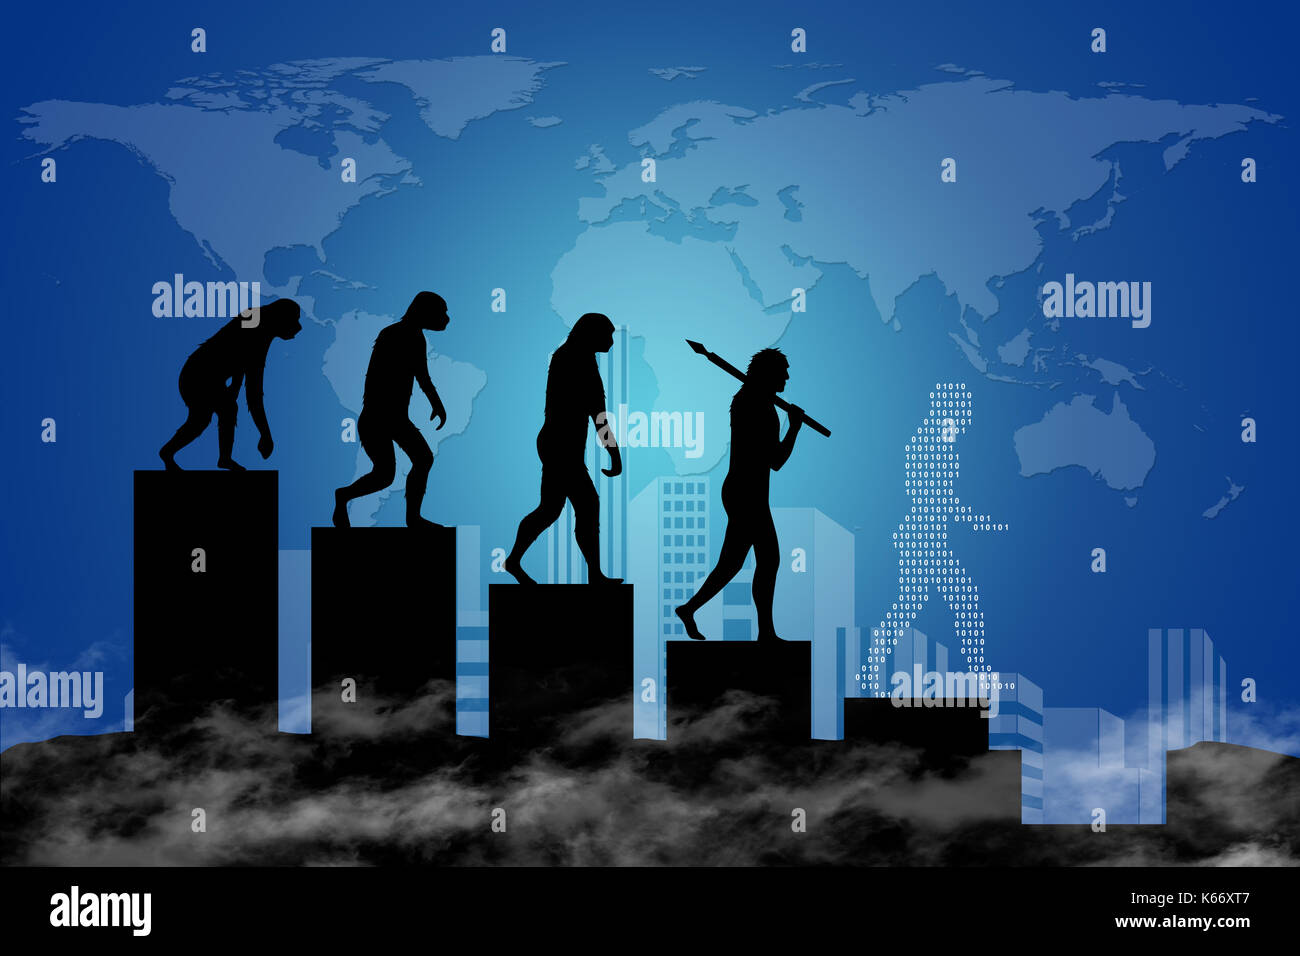 Human evolution into a modern world of digital technology. City-scape and world map in the background. Stock Photo